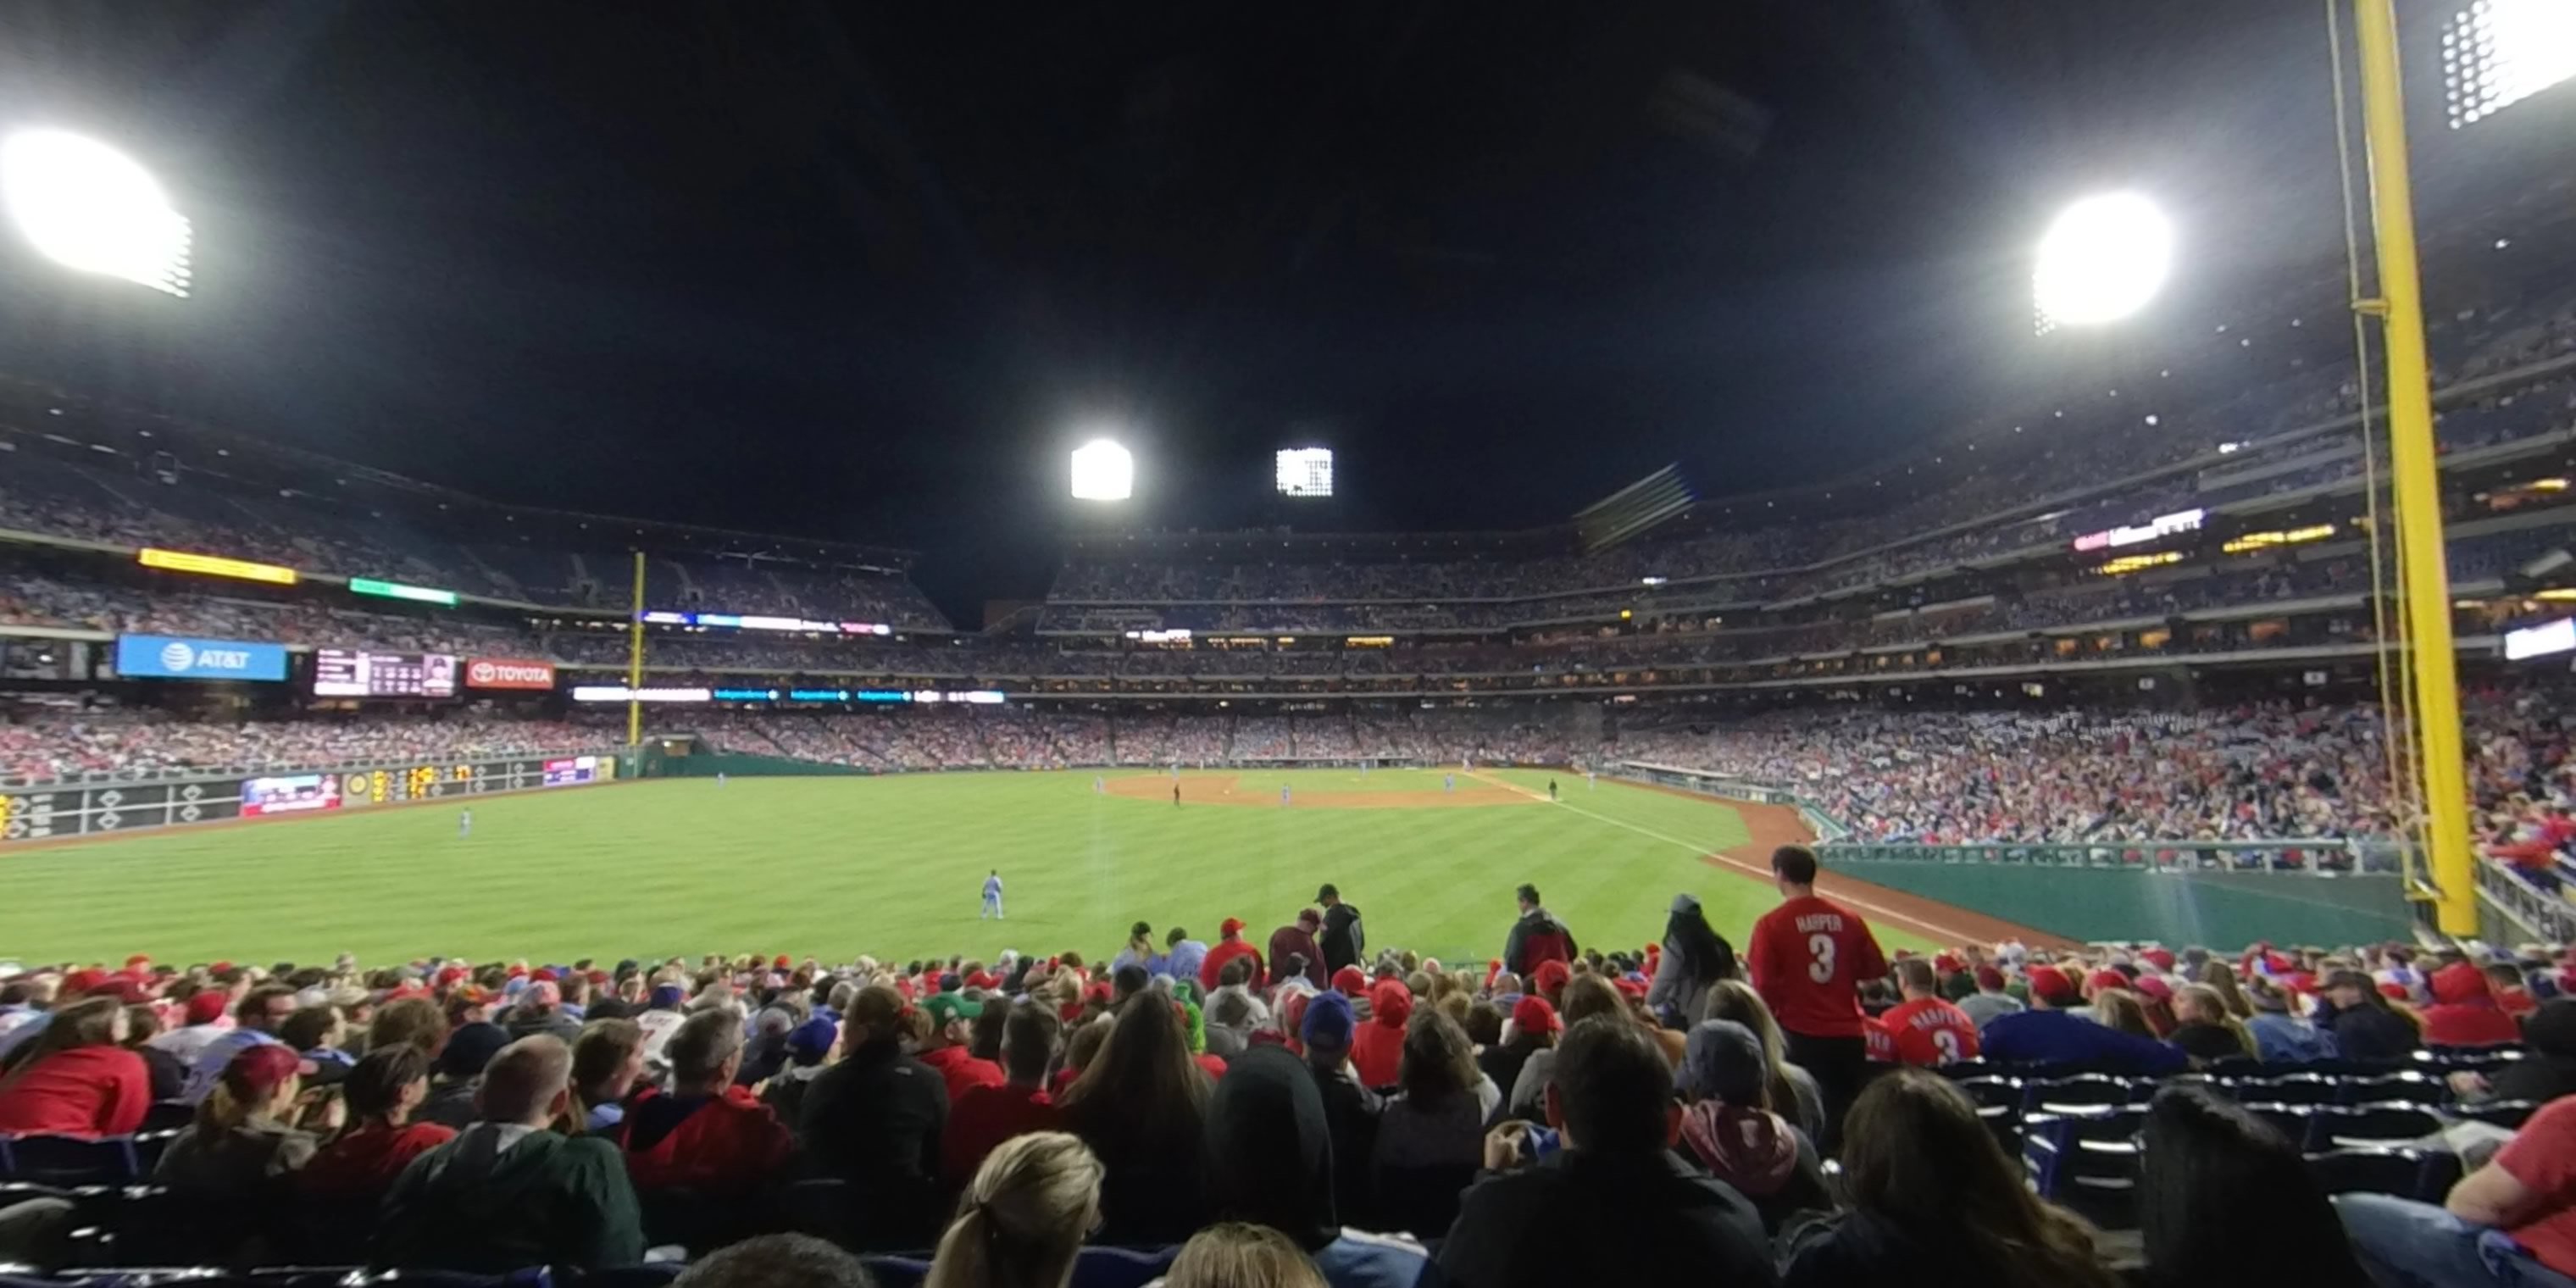 section 142 panoramic seat view  for baseball - citizens bank park